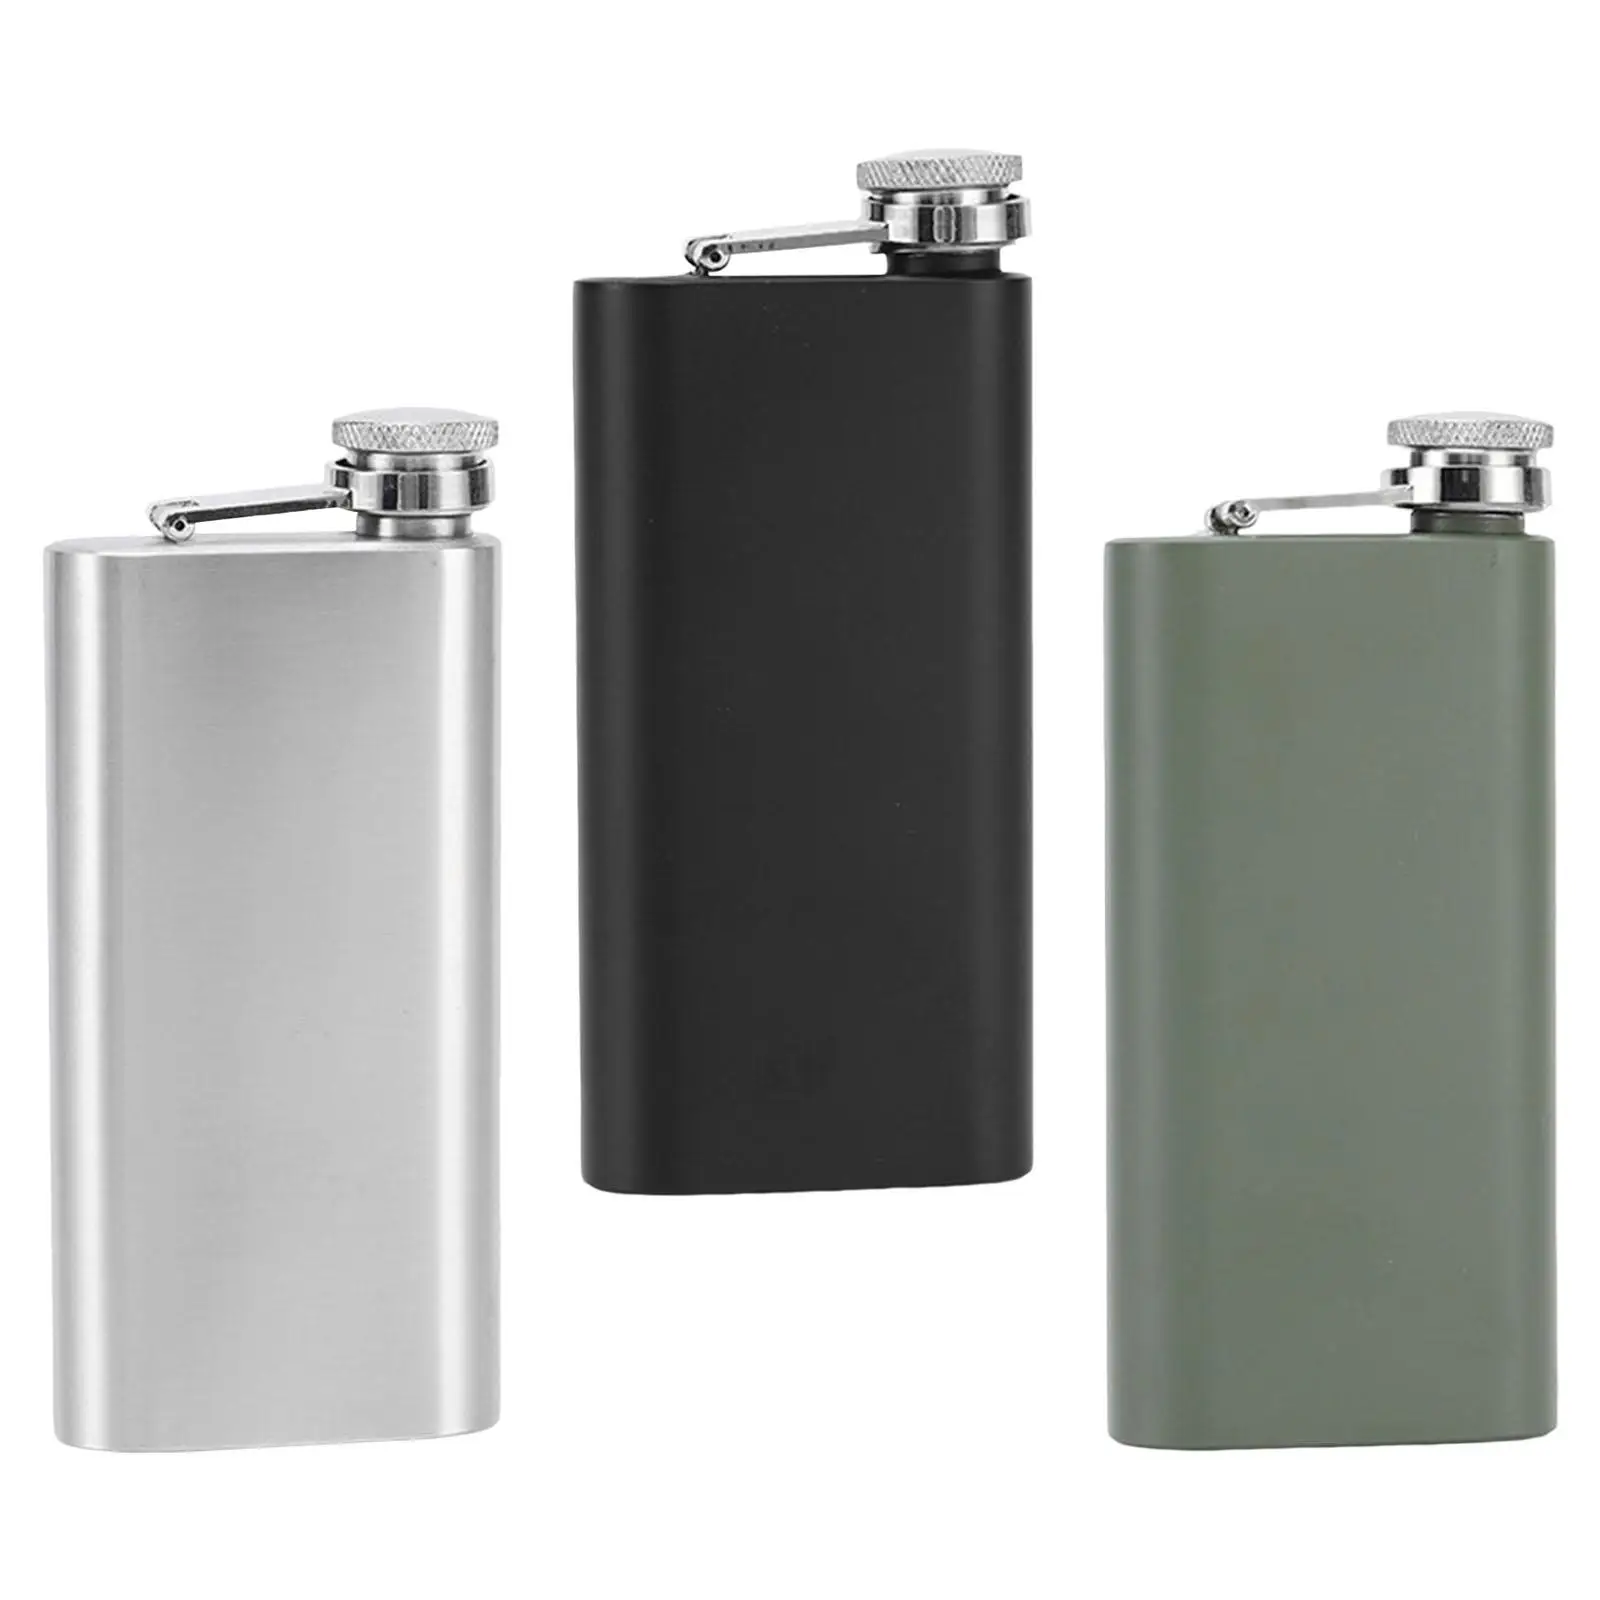 140ml Drinking Bottle Portable Stainless Steel for Hiking Fishing Camping